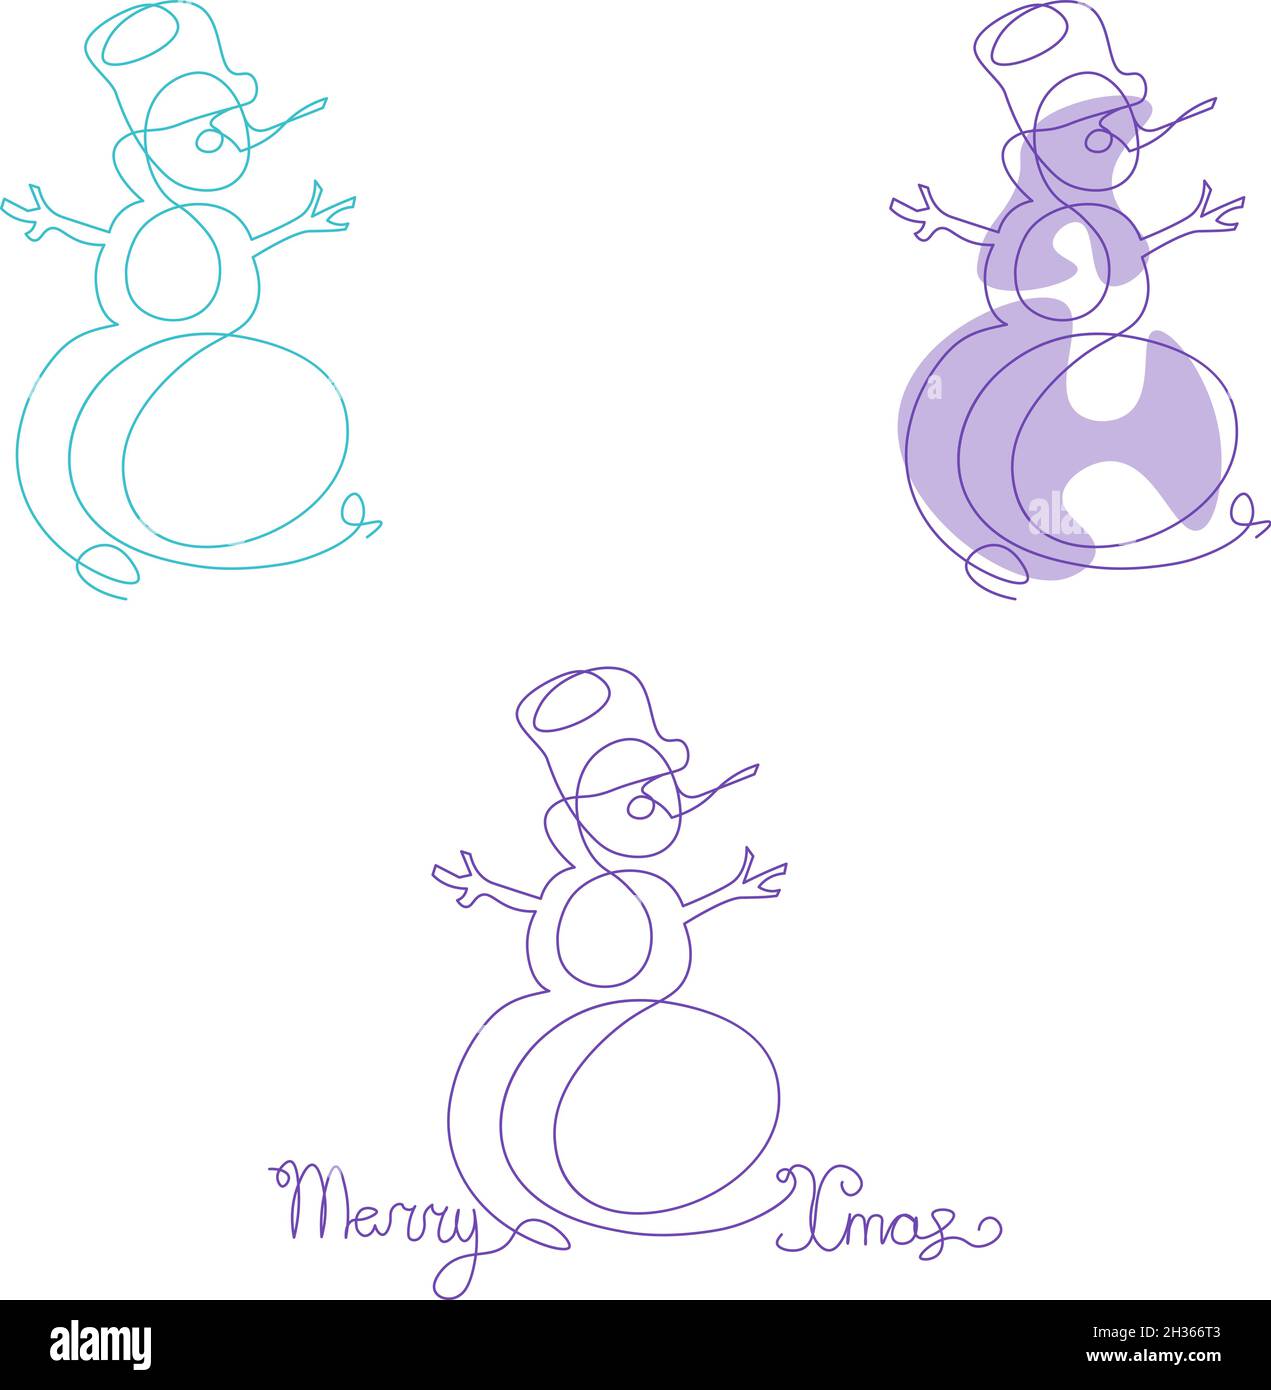 Set of winter icons with snowman drawing by contour line and shapes Stock Vector